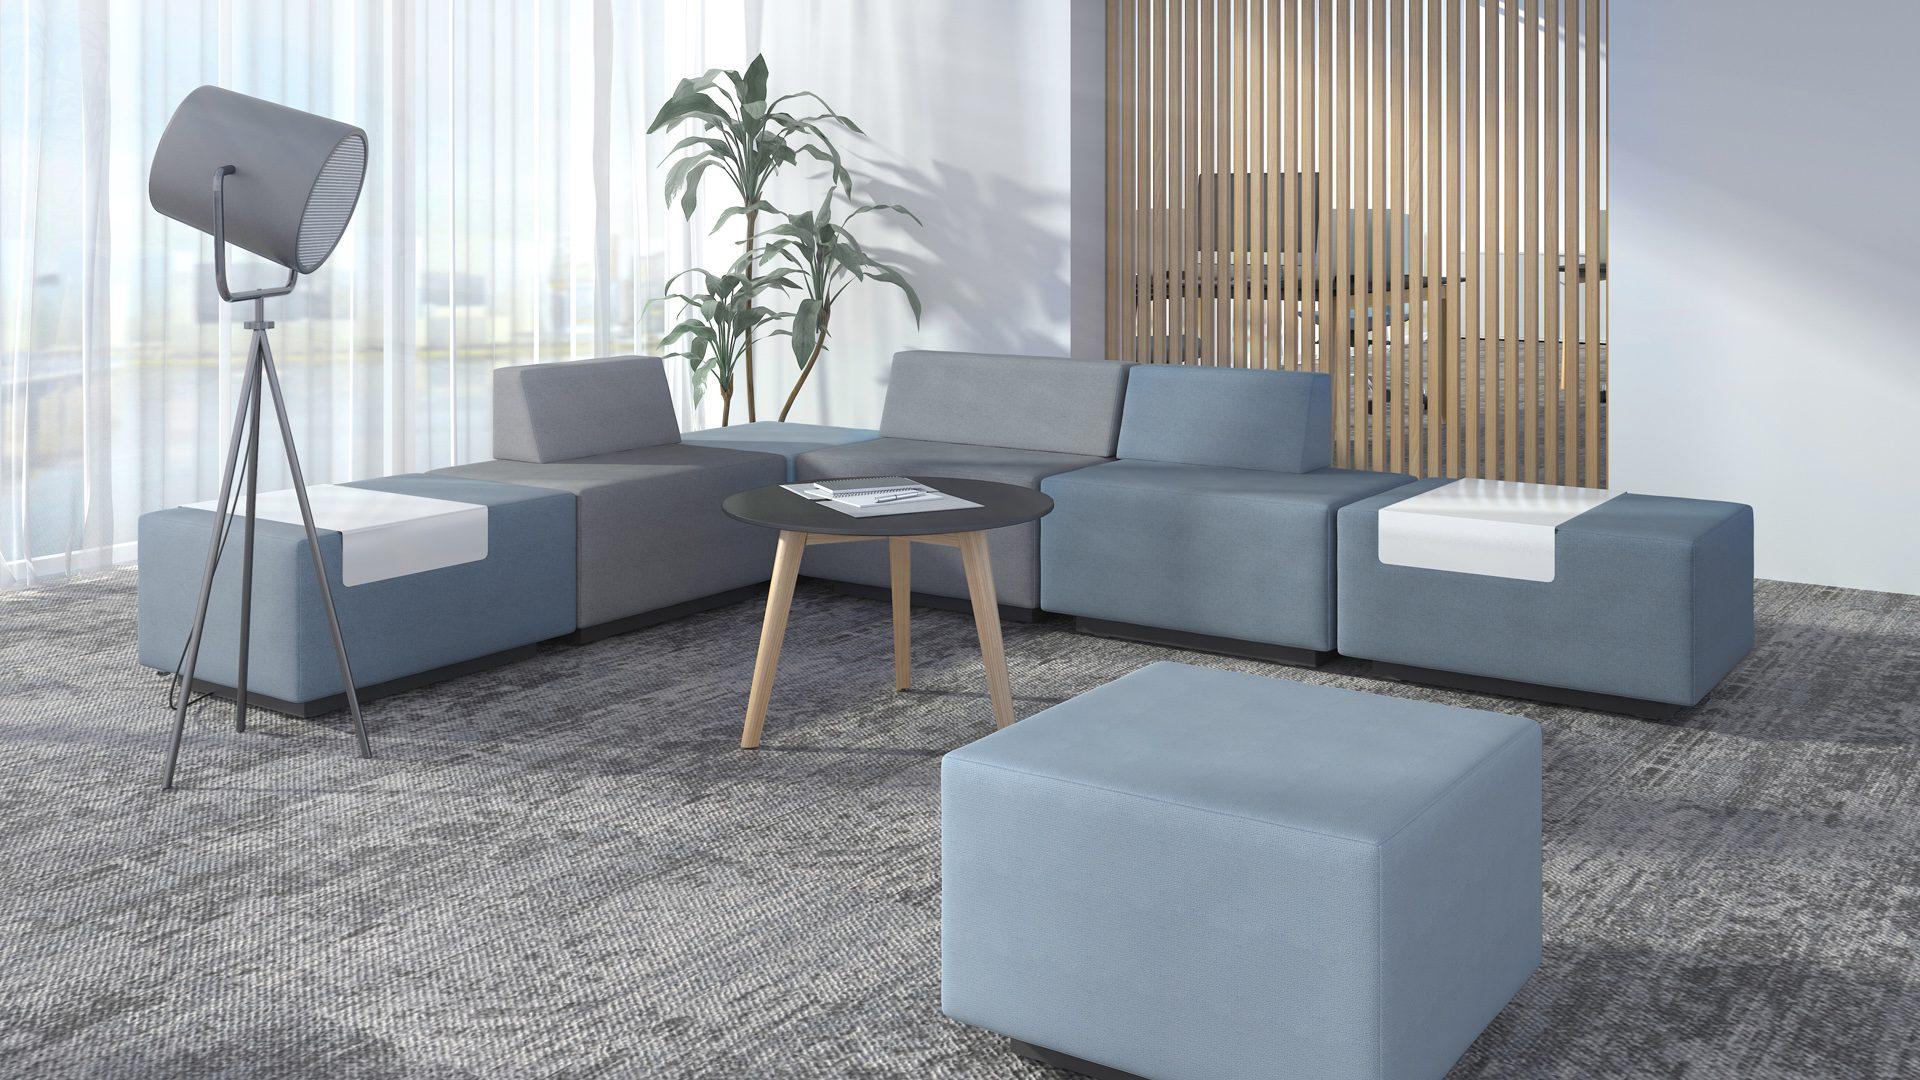 Jazz Chill Out modular soft seating with Nova Wood coffee table